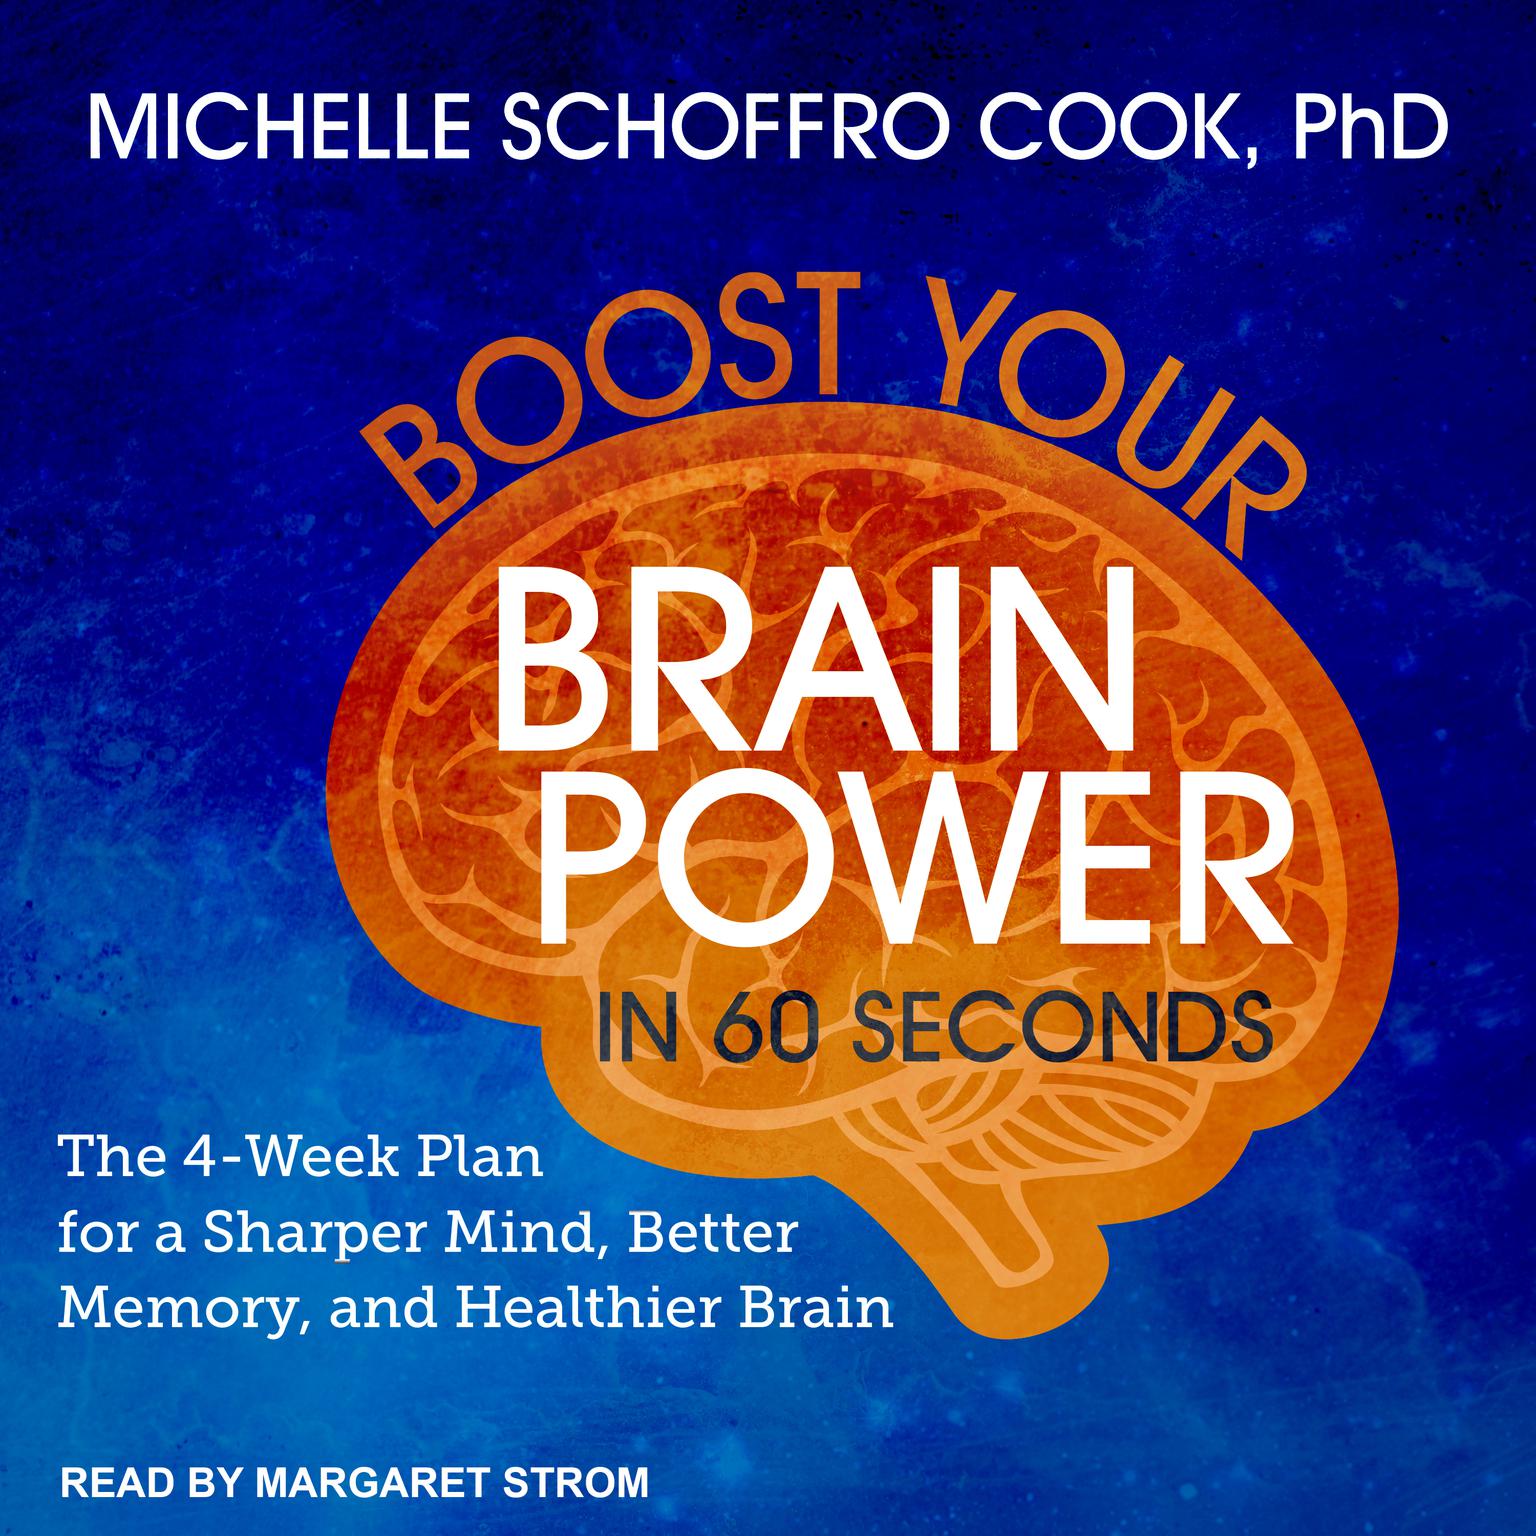 Boost Your Brain Power in 60 Seconds: The 4-Week Plan for a Sharper Mind, Better Memory, and Healthier Brain Audiobook, by Michelle Schoffro Cook